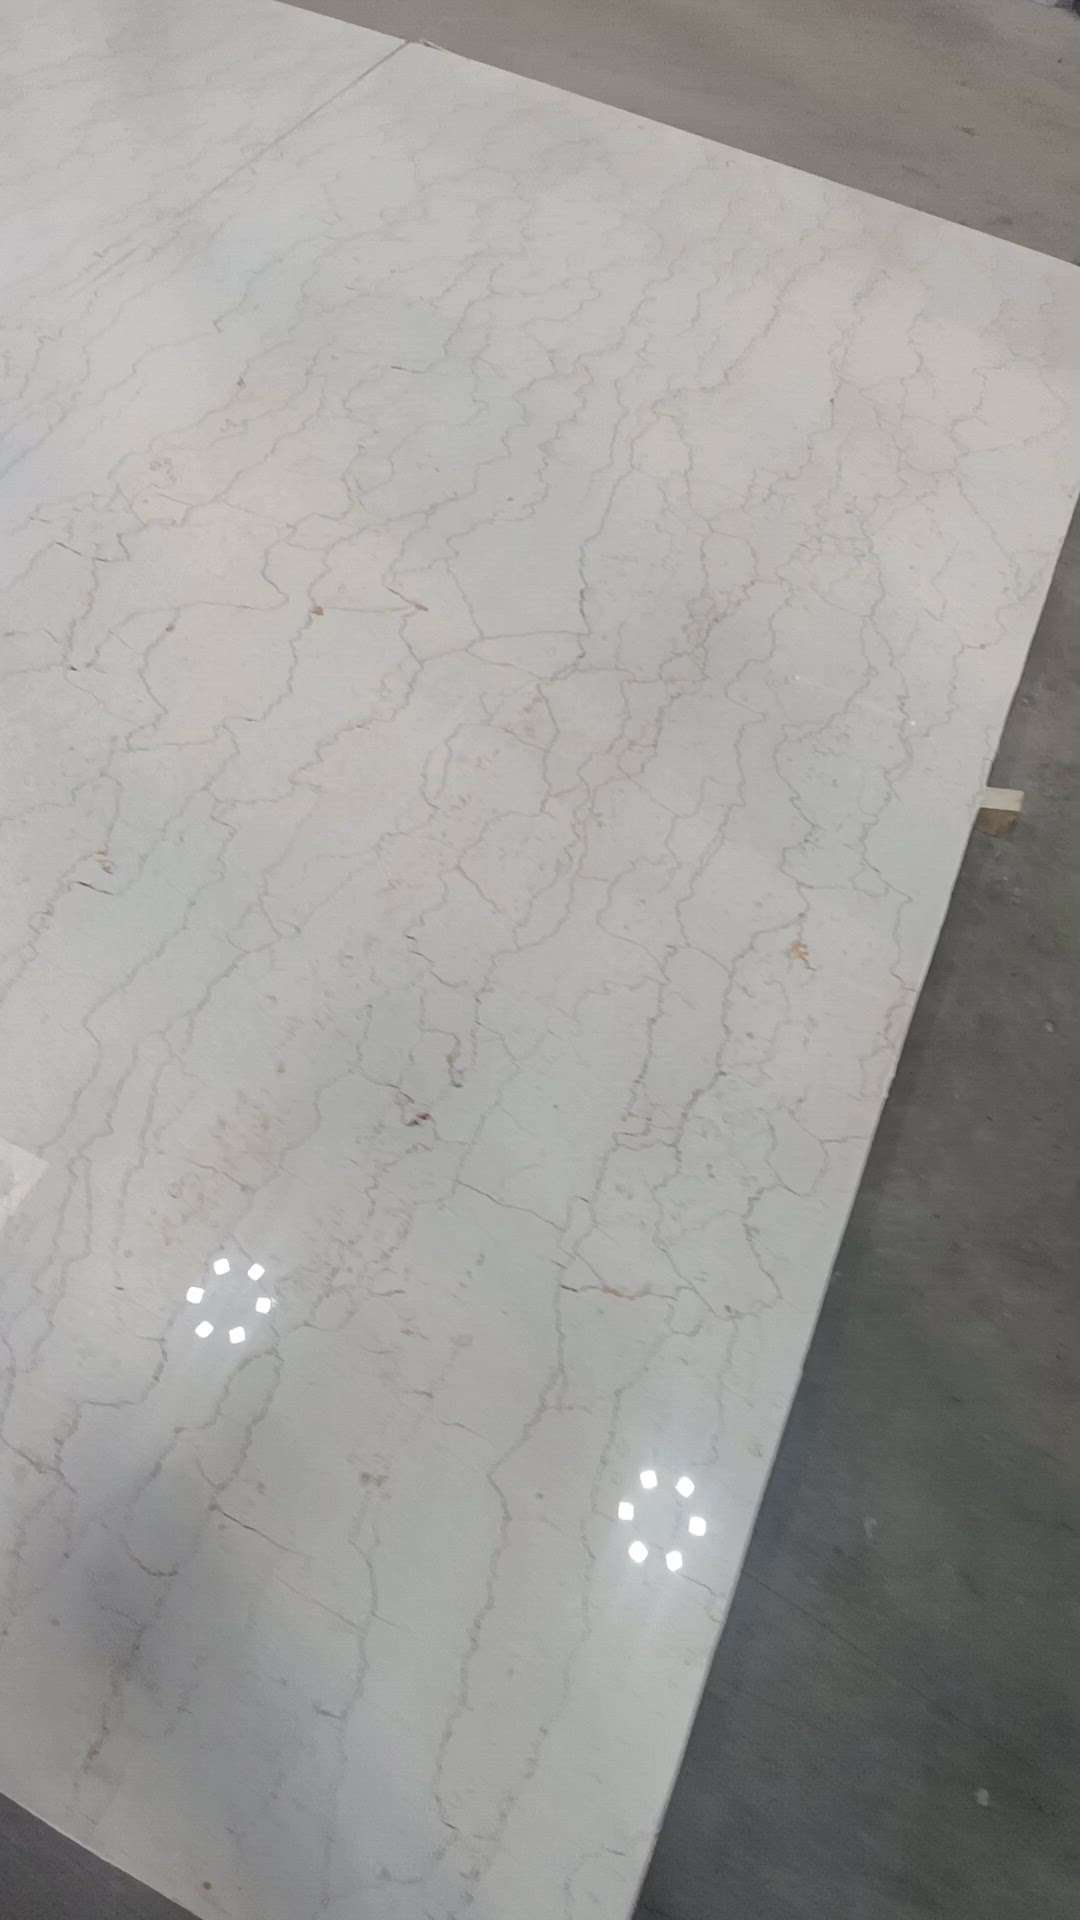 # #CREAMA PIRLATO # #importedmarble  # # #qualitymarble  # # # #standard  # # #lightcolour  # # # # #premiumproduct  # # # #please_contact_for_any_enquiry  # # # #https://wa.me/message/A2ID5QSXDULIO1 # # #